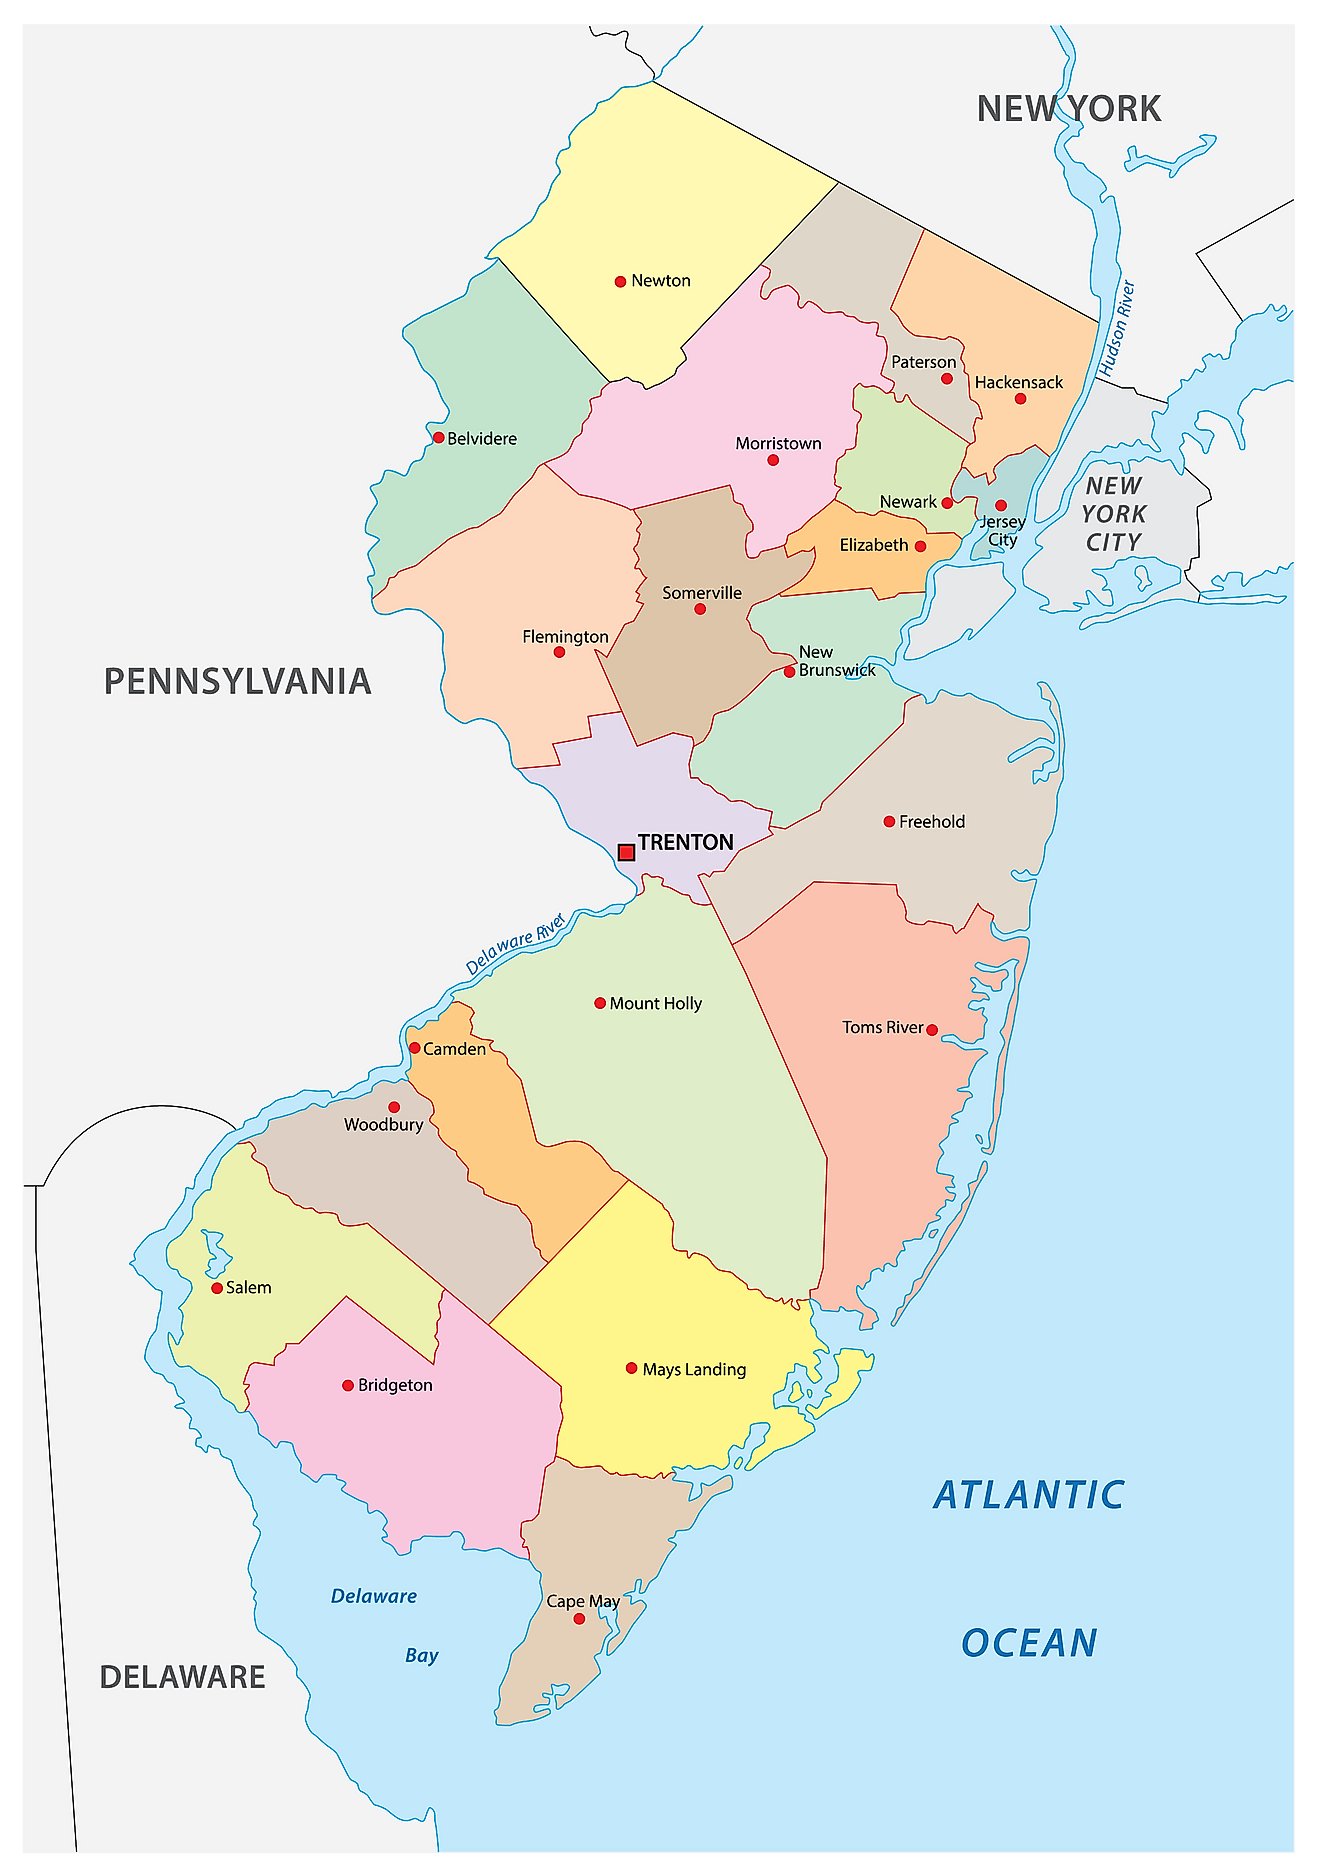 New Jersey County Map Of South Central